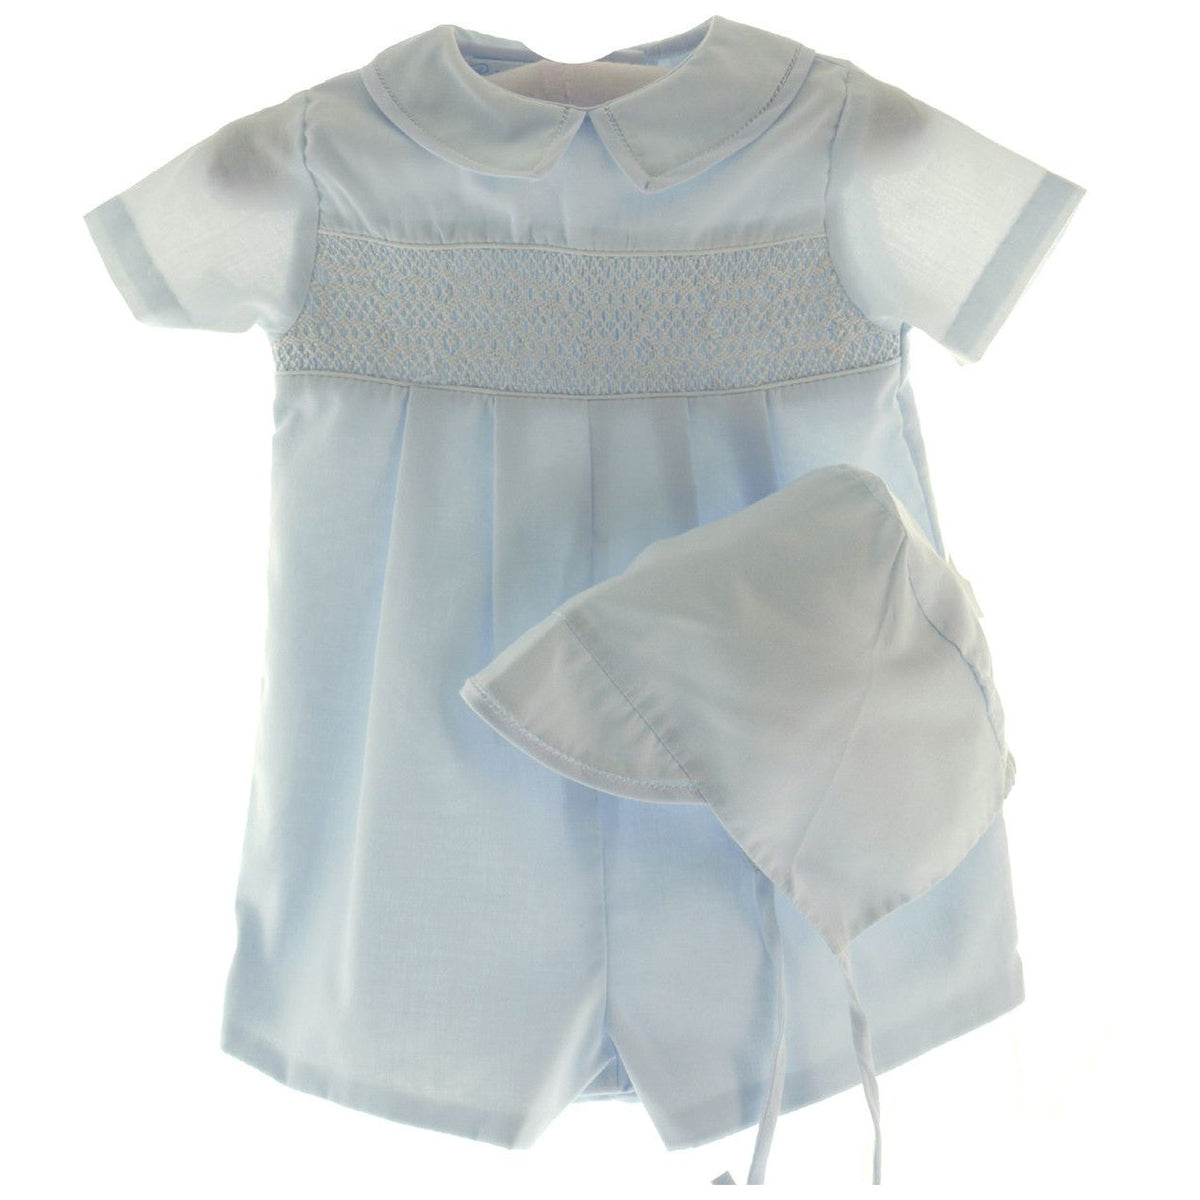 Boys Smocked Blue Romper Outfit